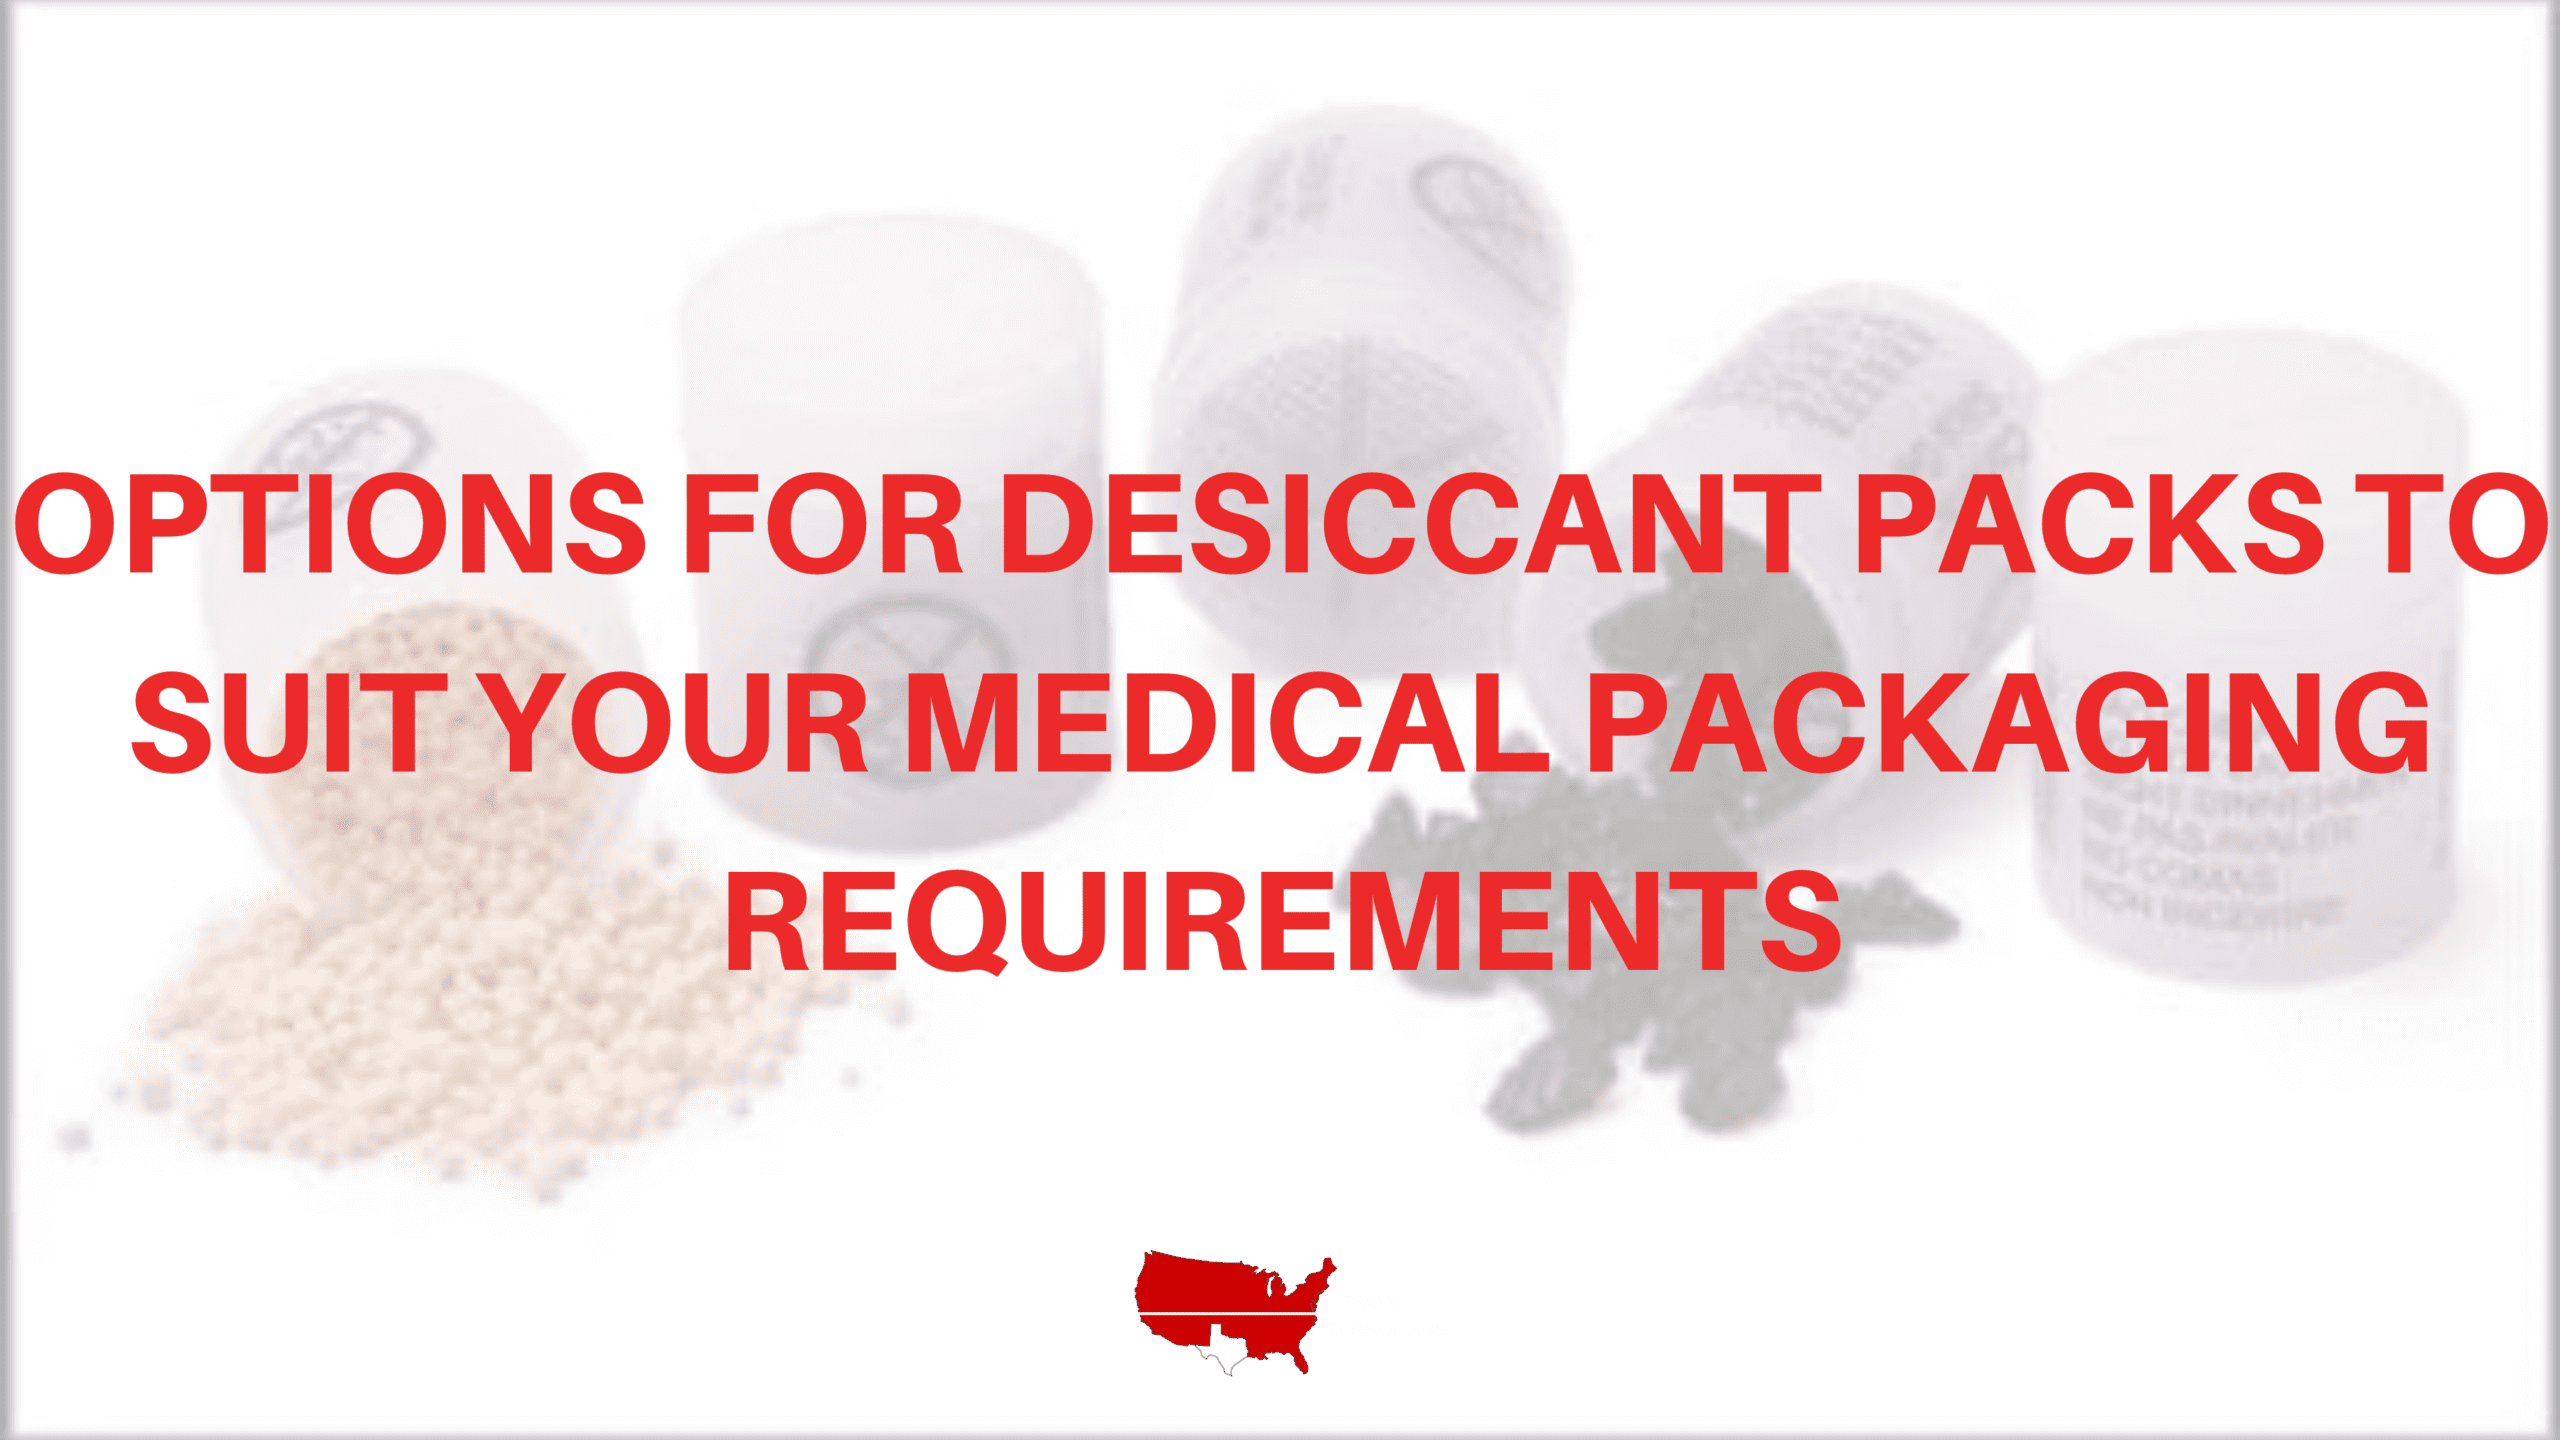 Options for Desiccant Packs to Suit Your Medical Packaging Requirements